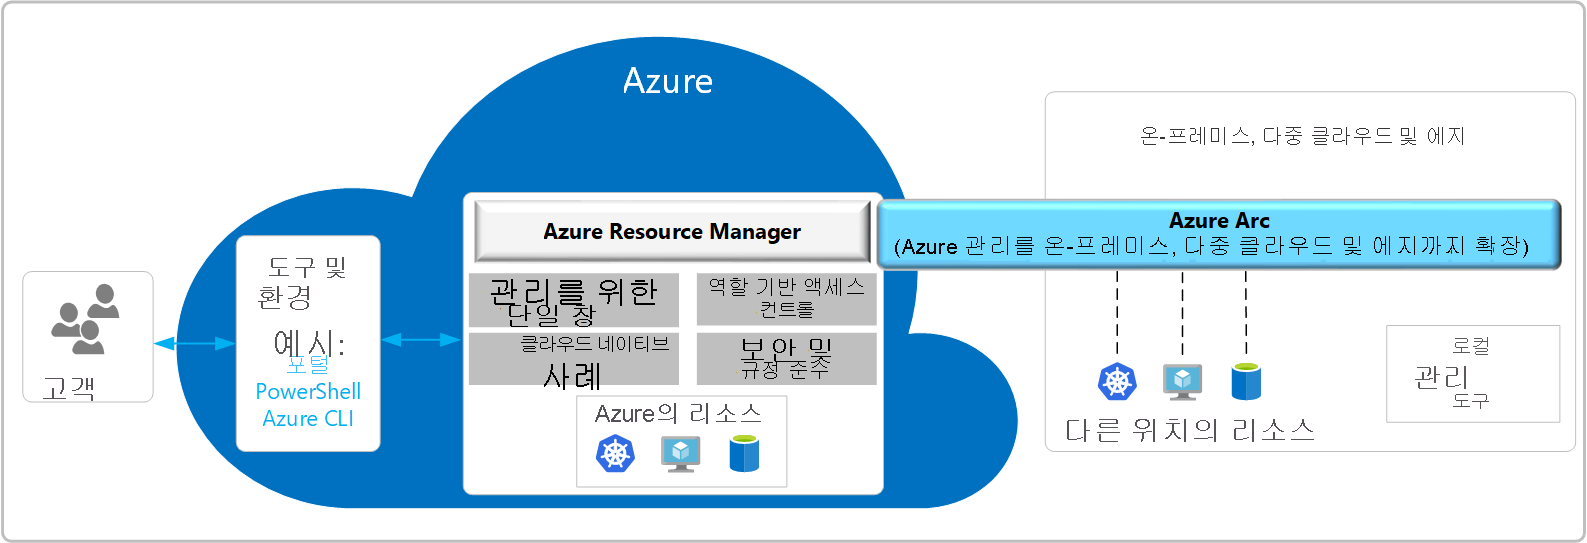 Diagram of the Azure ARC Control Plane for resources.